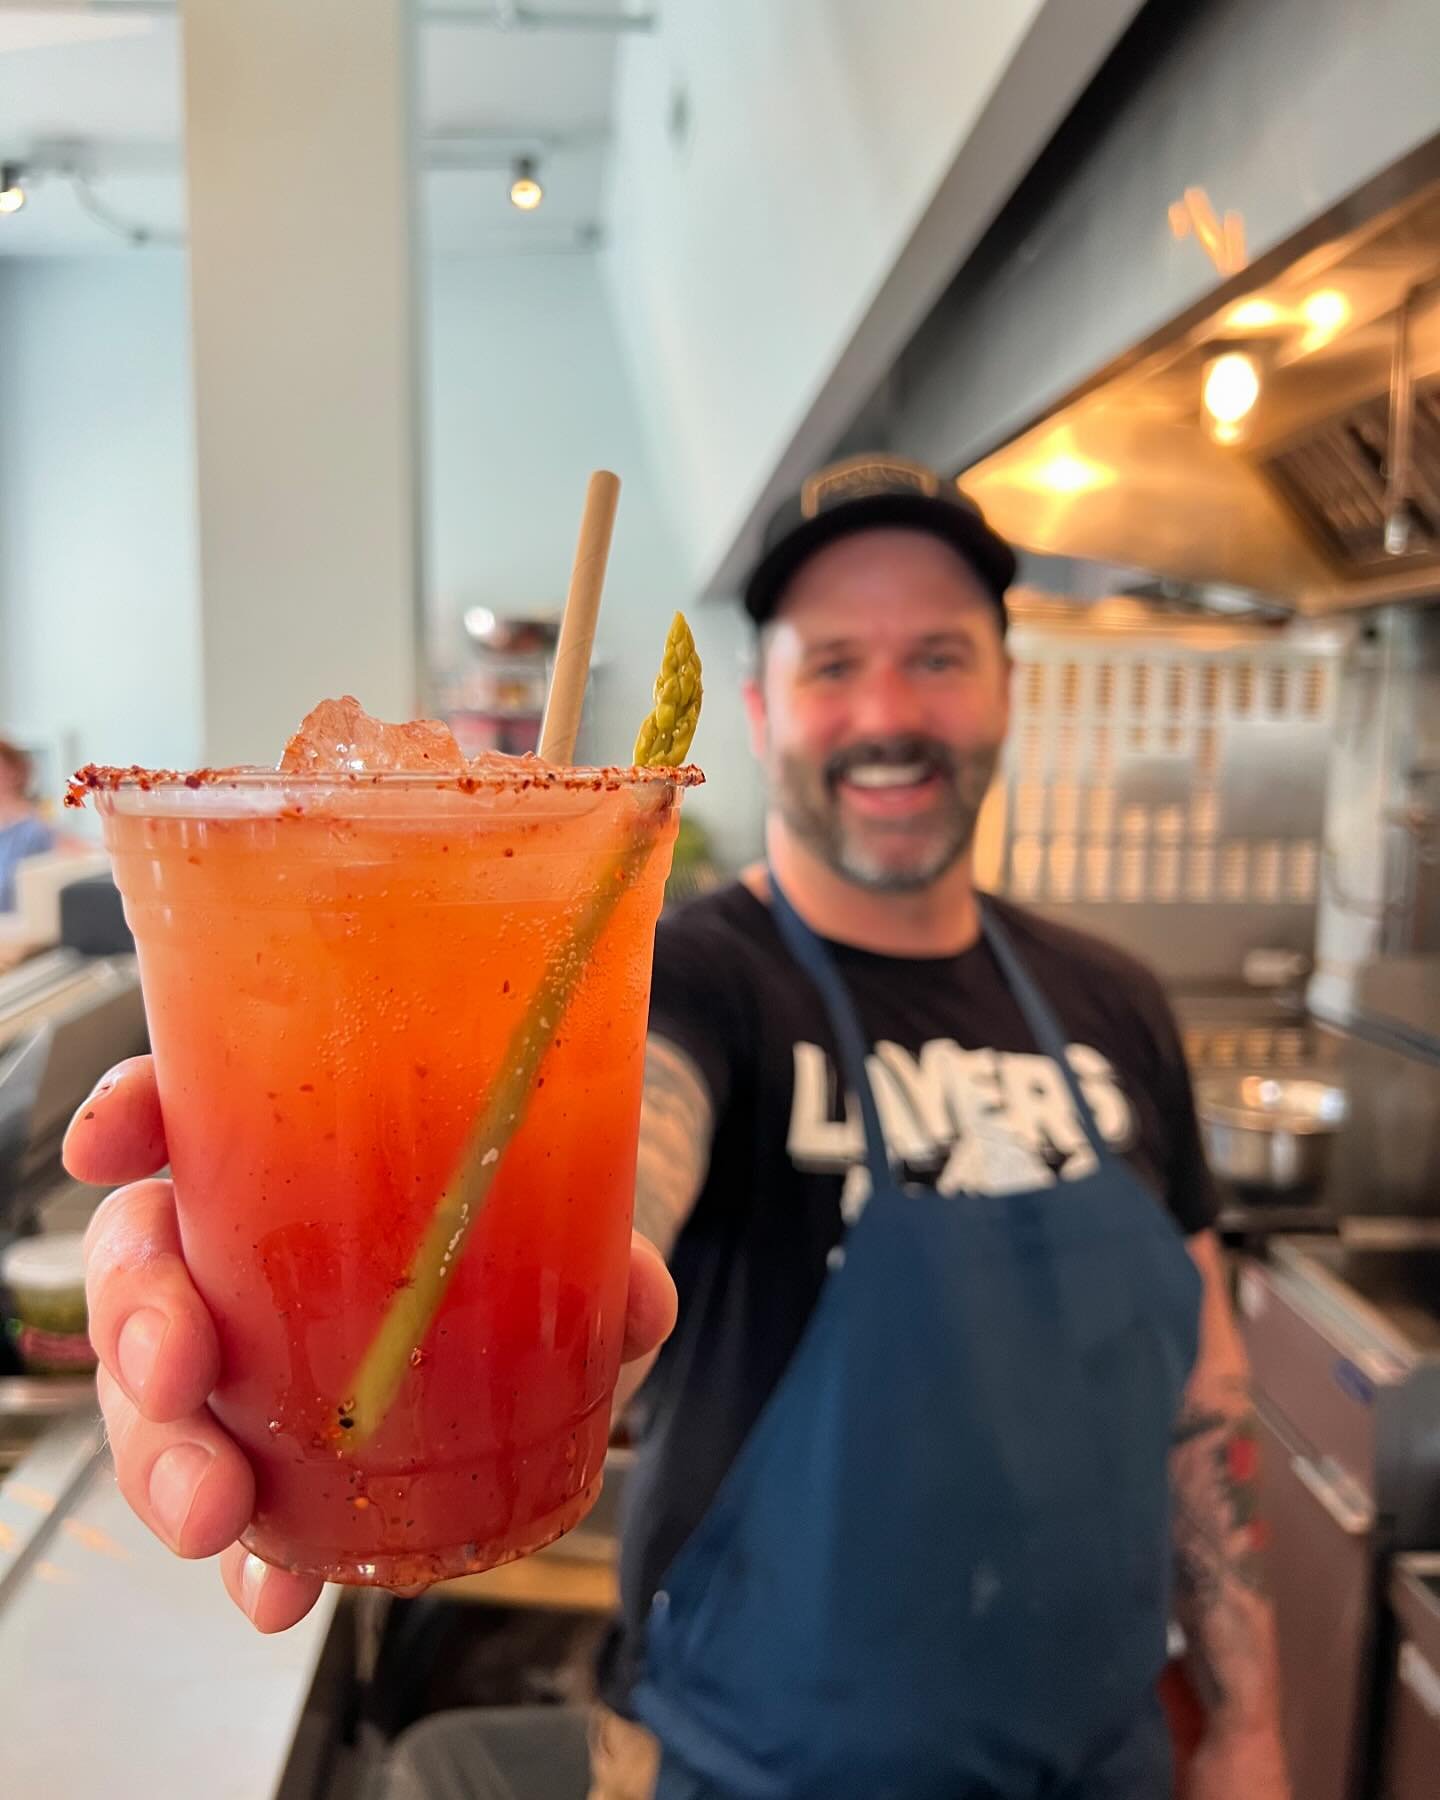 It&rsquo;s Spicy Micheladas and TBRs ALL 👏🏼 WEEKEND 👏🏼 LONG 👏🏼 Come and grab one&hellip;or five. Oh, and hey!! The park and lake are just a stones throw from our front door, whether you dine with us or take it across the street, we&rsquo;re jus